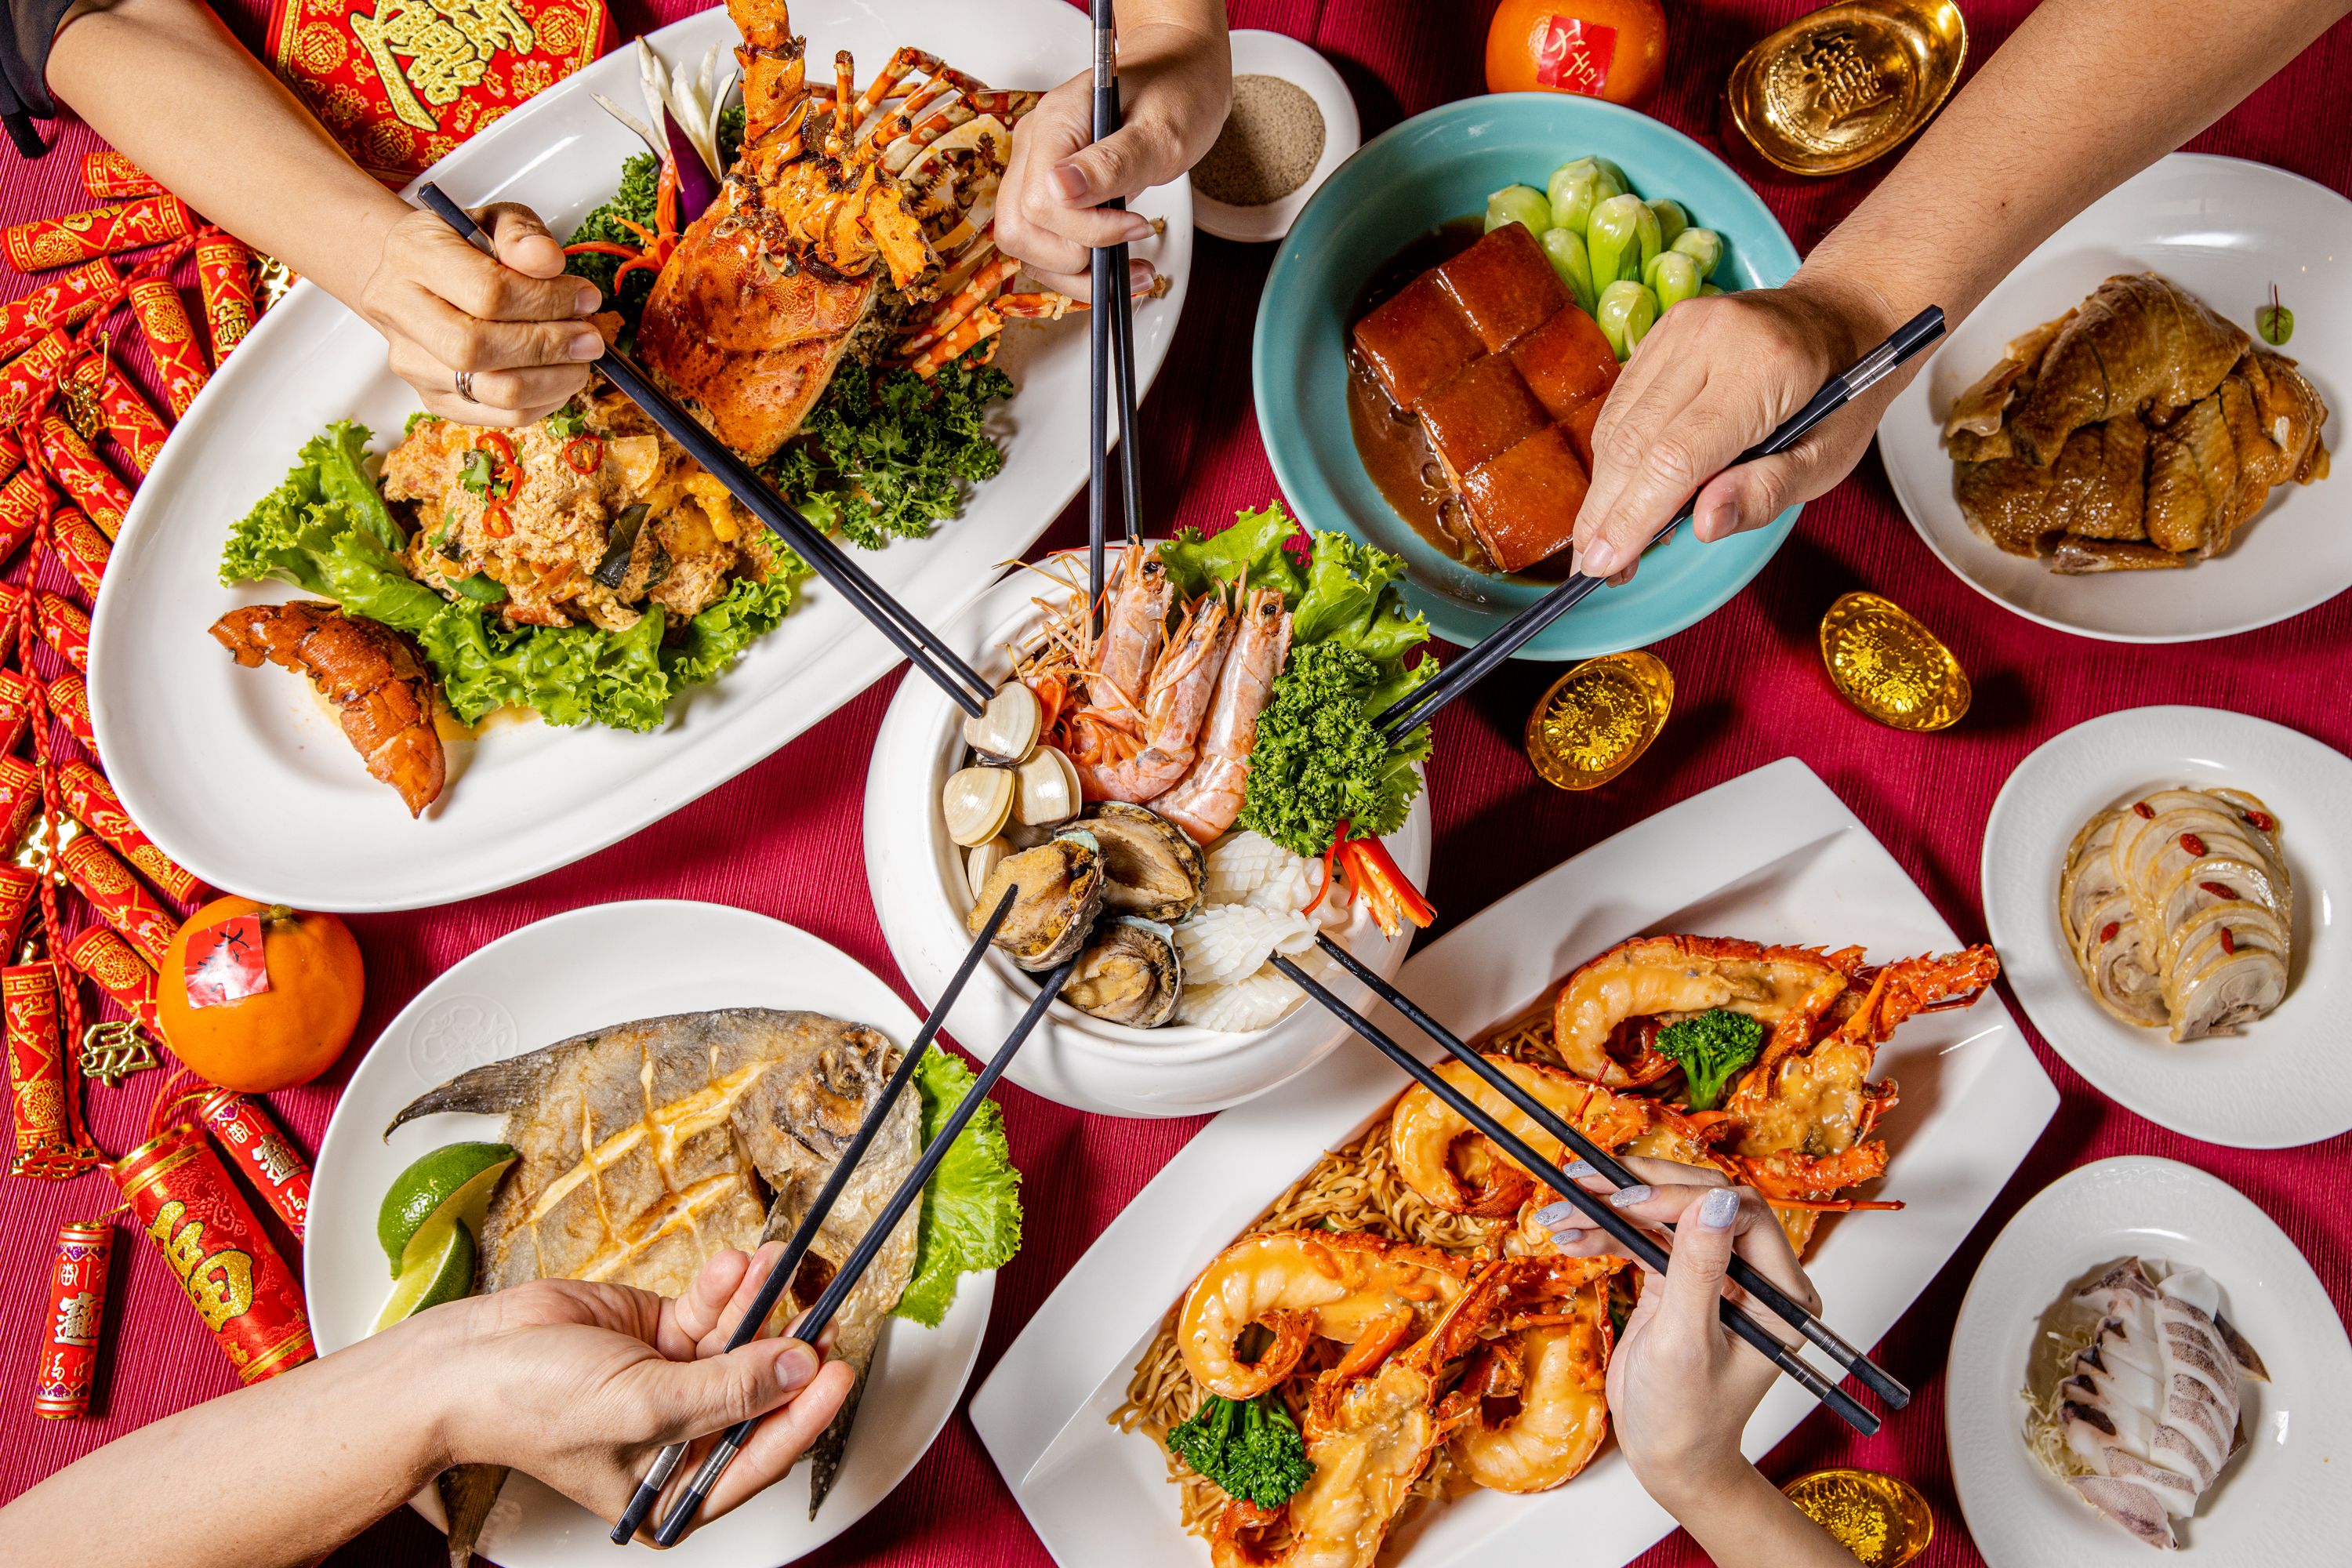 From January 31st to February 5th, Regent Taipei's Restaurants Will Be Serving Hearty Feasts